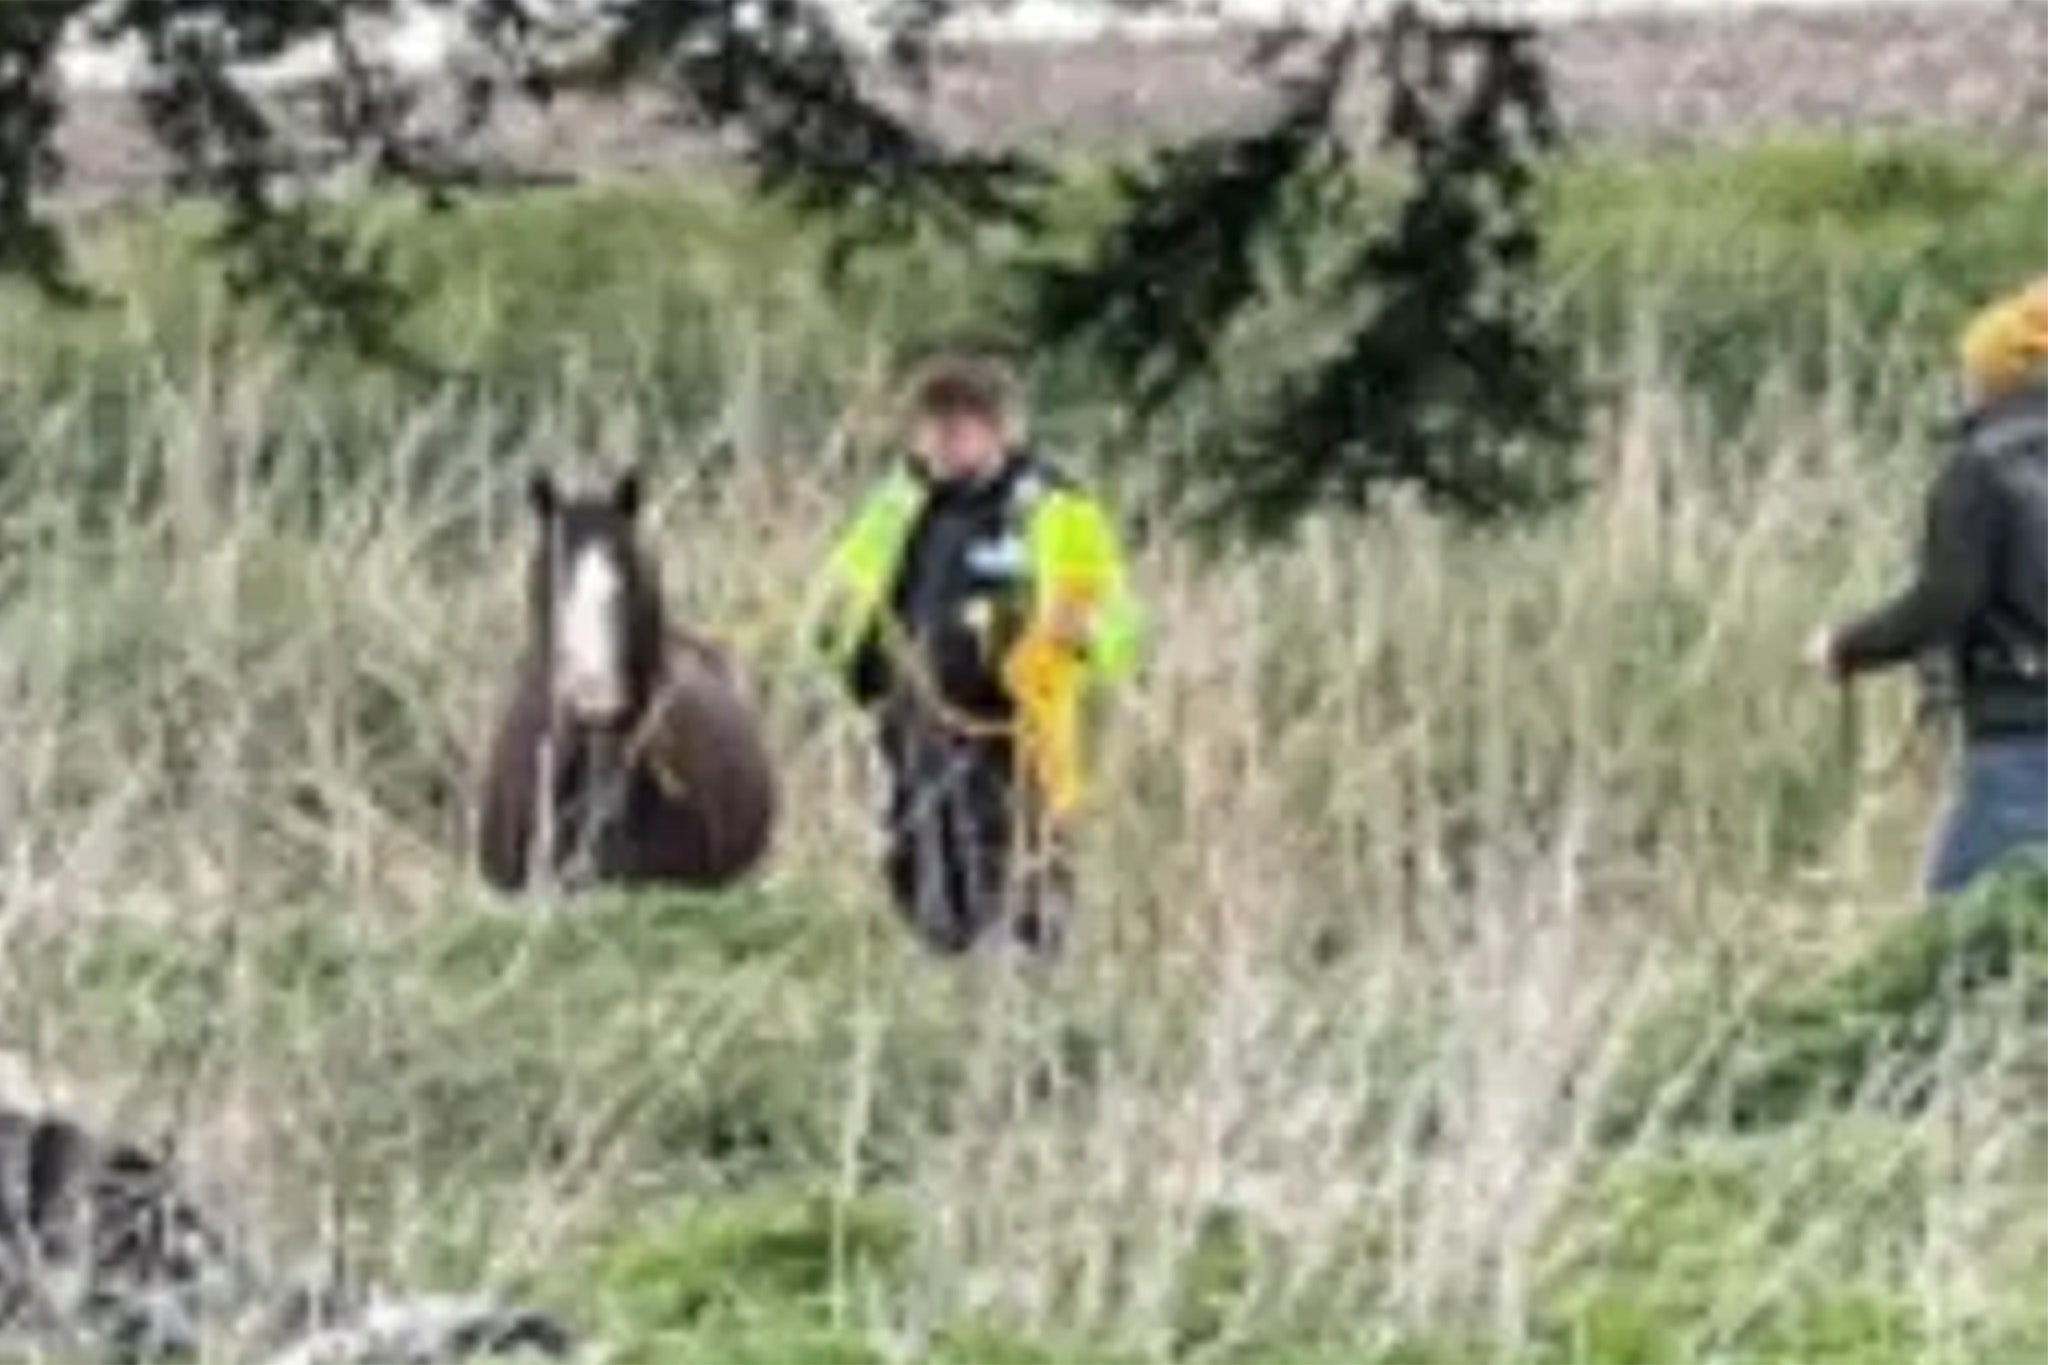 Officer with captured horse